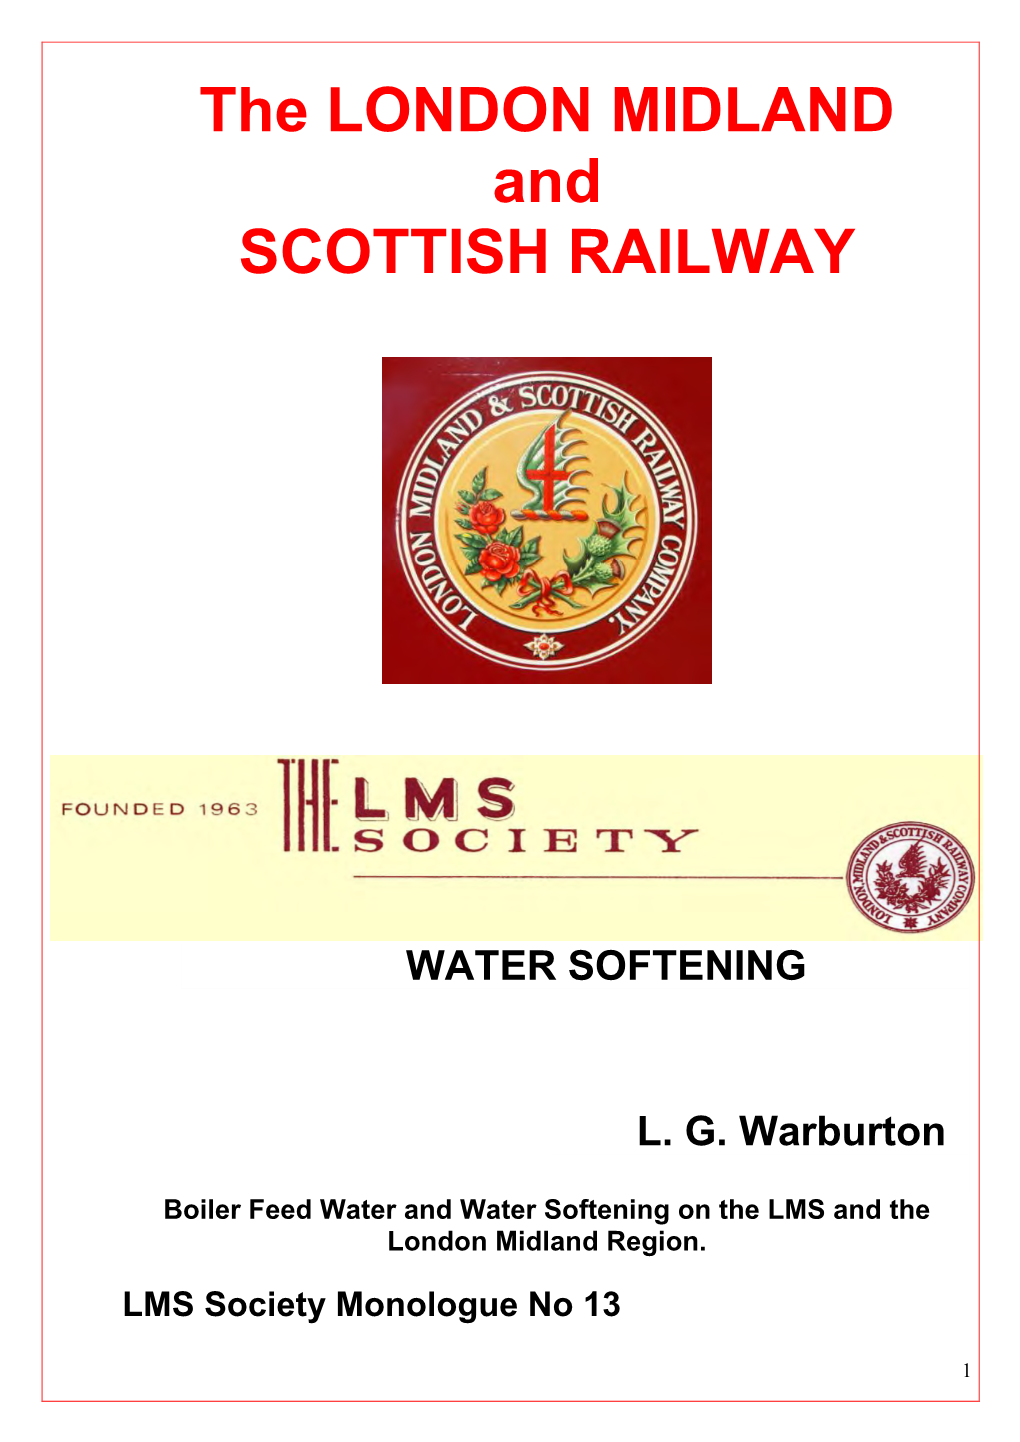 Boiler Feed Water and Water Softening on the LMS and the London Midland Region